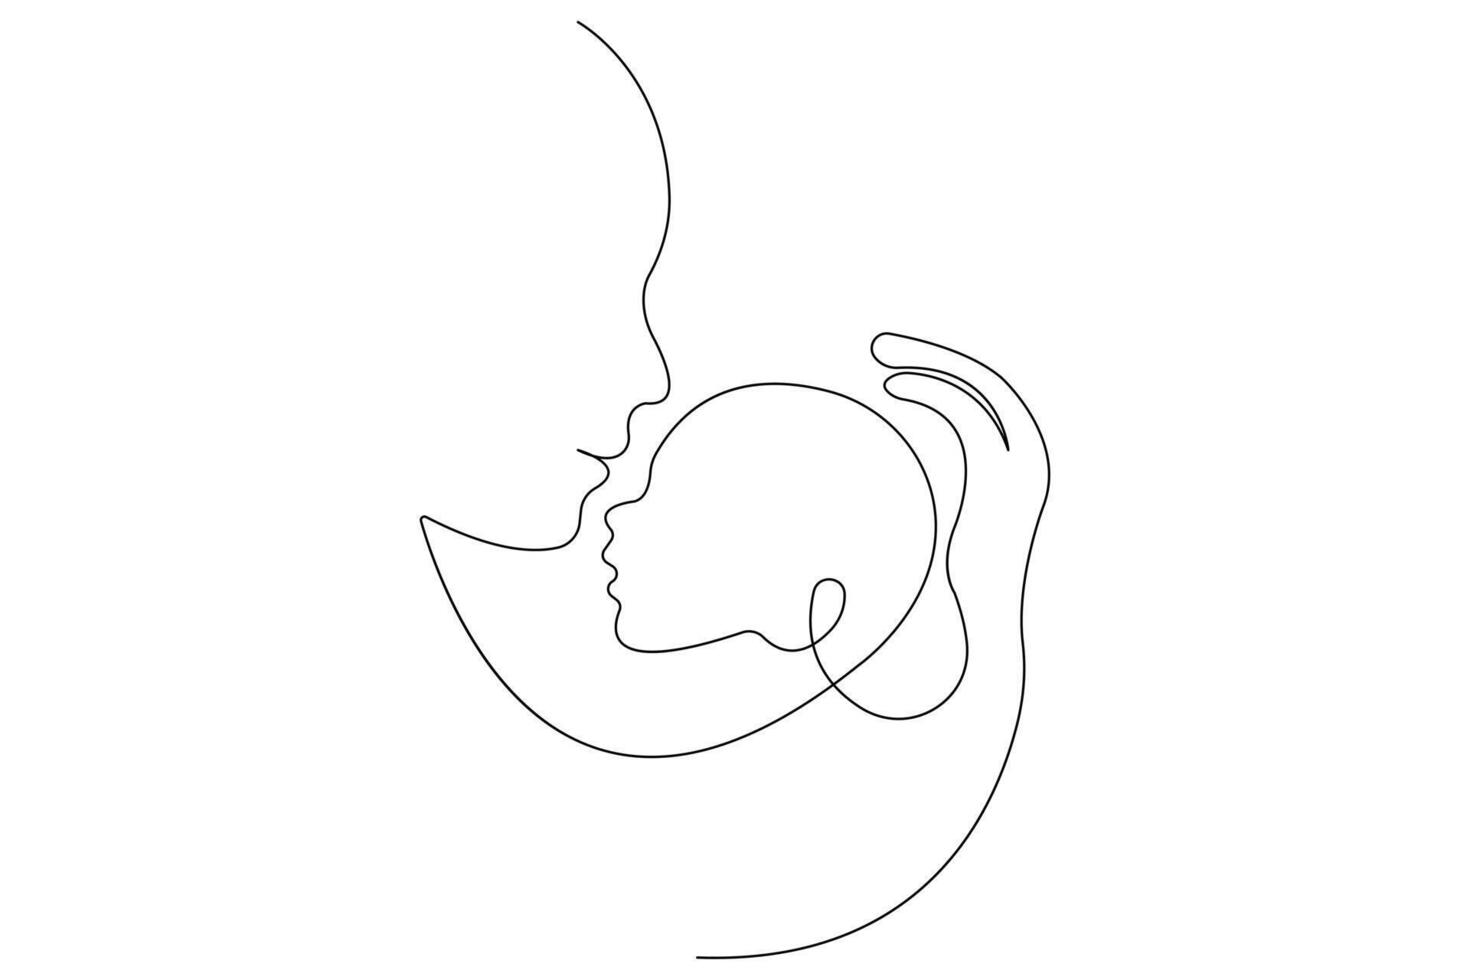 Continuous single line art drawing of baby sketch and concept outline vector